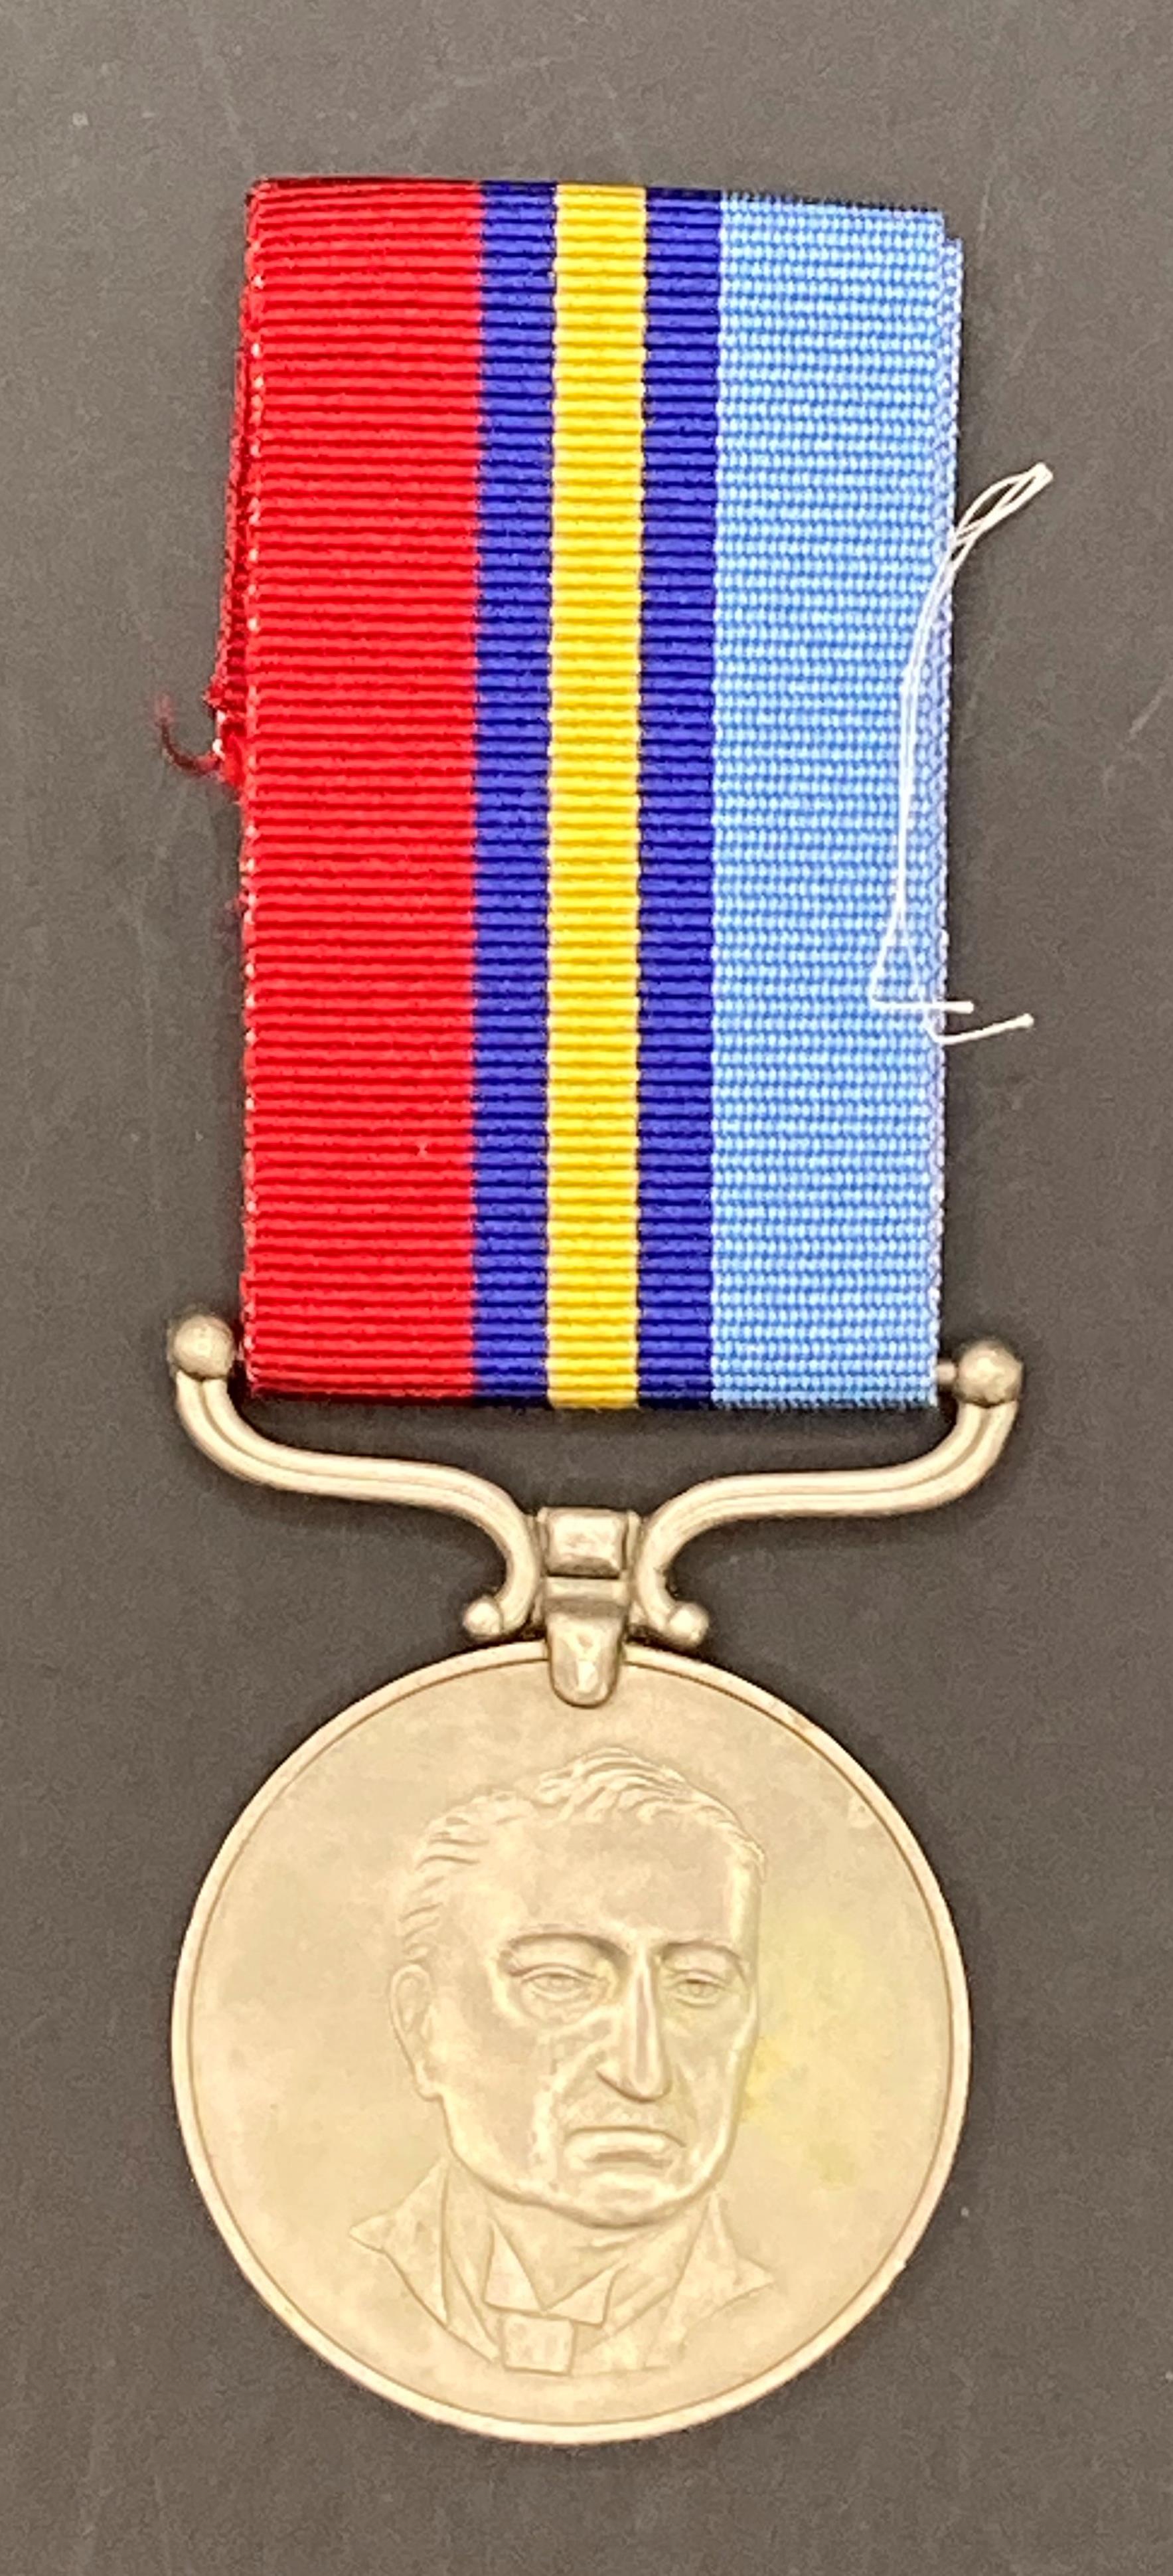 Rhodesia Service Medal 1964-1980 complete with ribbon to 20725B F/R M R Sadler (Saleroom location: